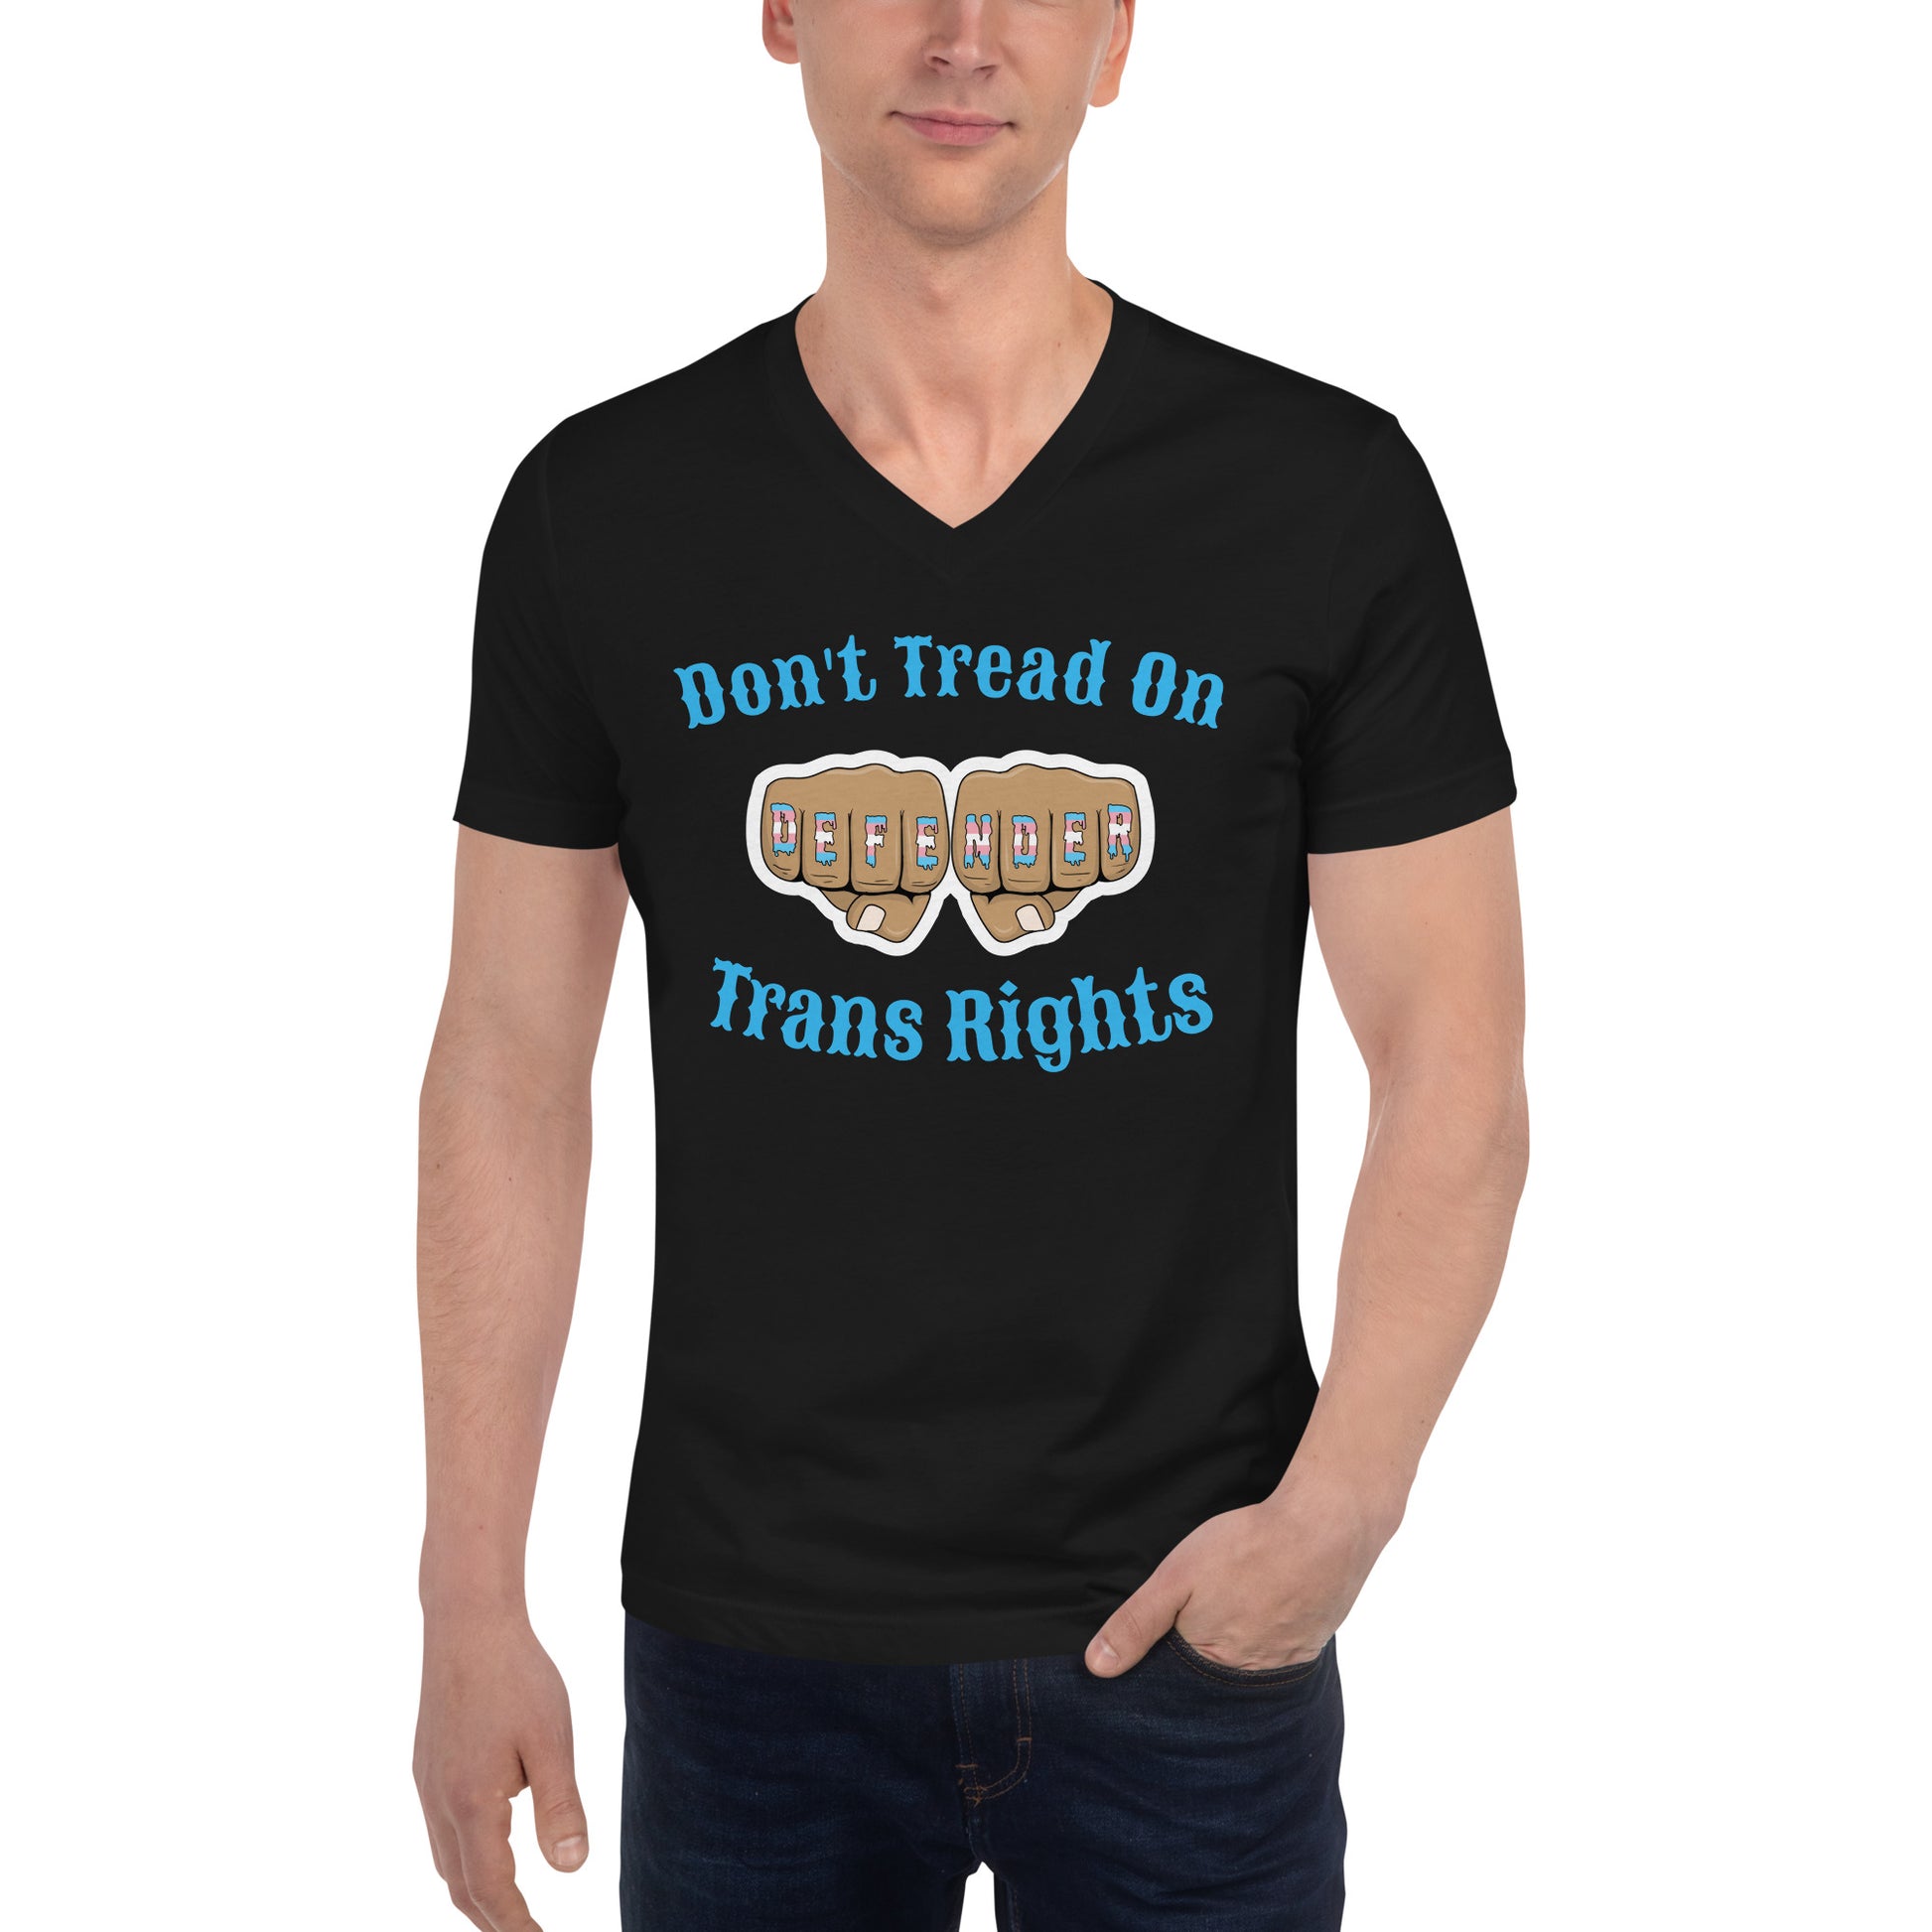 A v-neck, short sleeve t-shirt in black with the text "Don't Tread on Trans Rights" in blue lettering circling an image of fists with "defender" written across the knuckles in blue, pink, and white. The shirt is on a white, straight sized model standing against a white background.